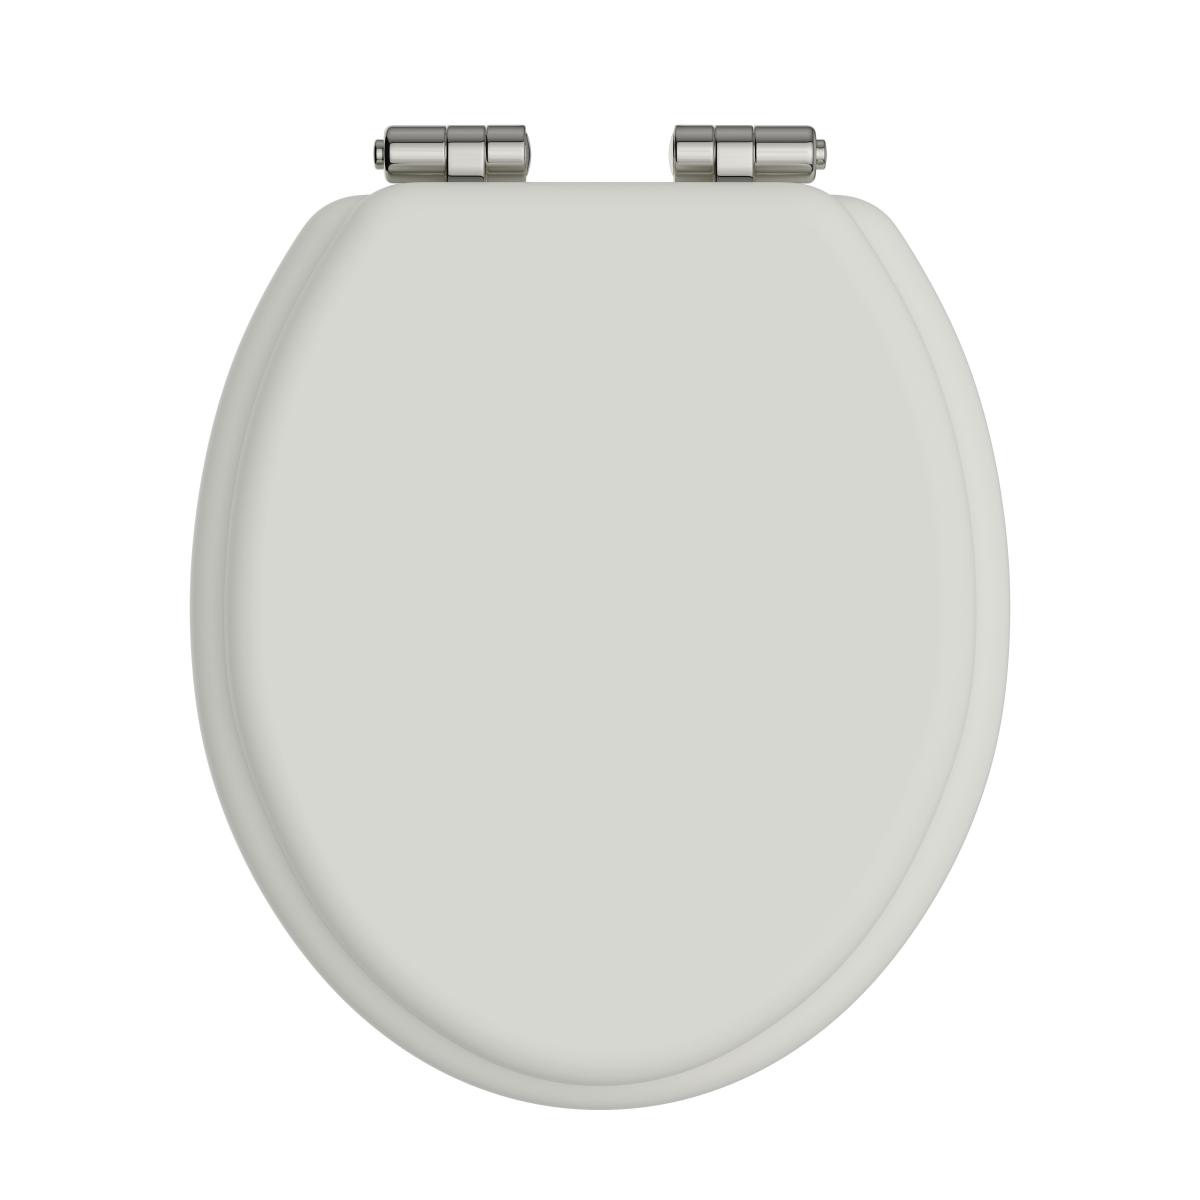 Toilet Seat Soft Close Vintage Gold Hinges - Chantilly